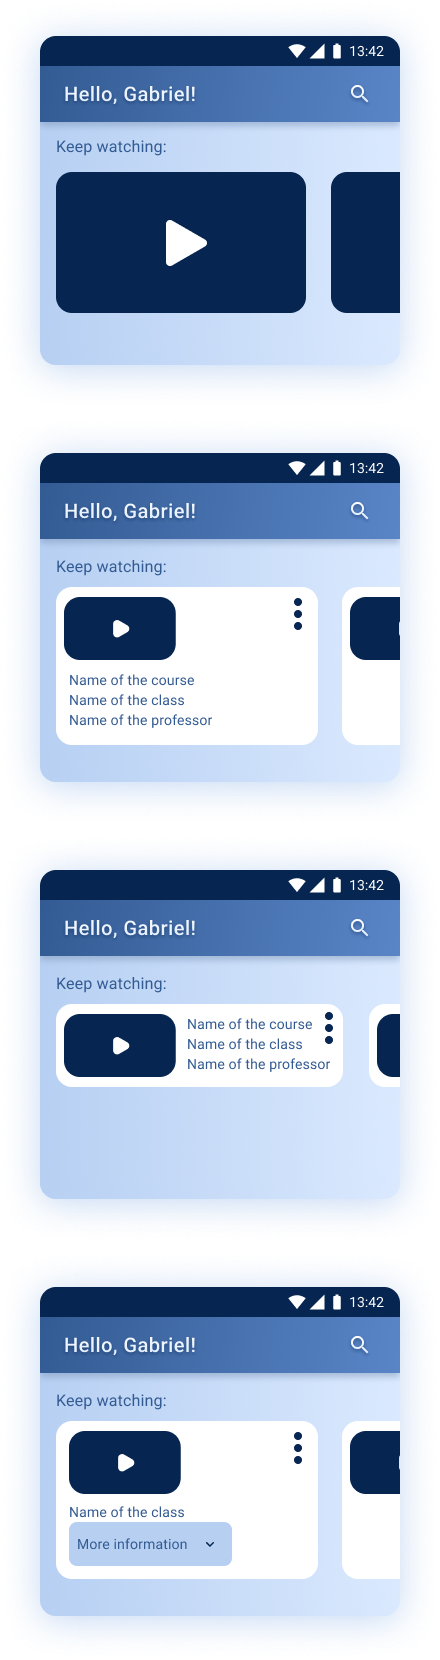 Screenshot of the homepage of the education app divided into 4 versions, where the “Keep watching” functionality is elaborated in different ways.